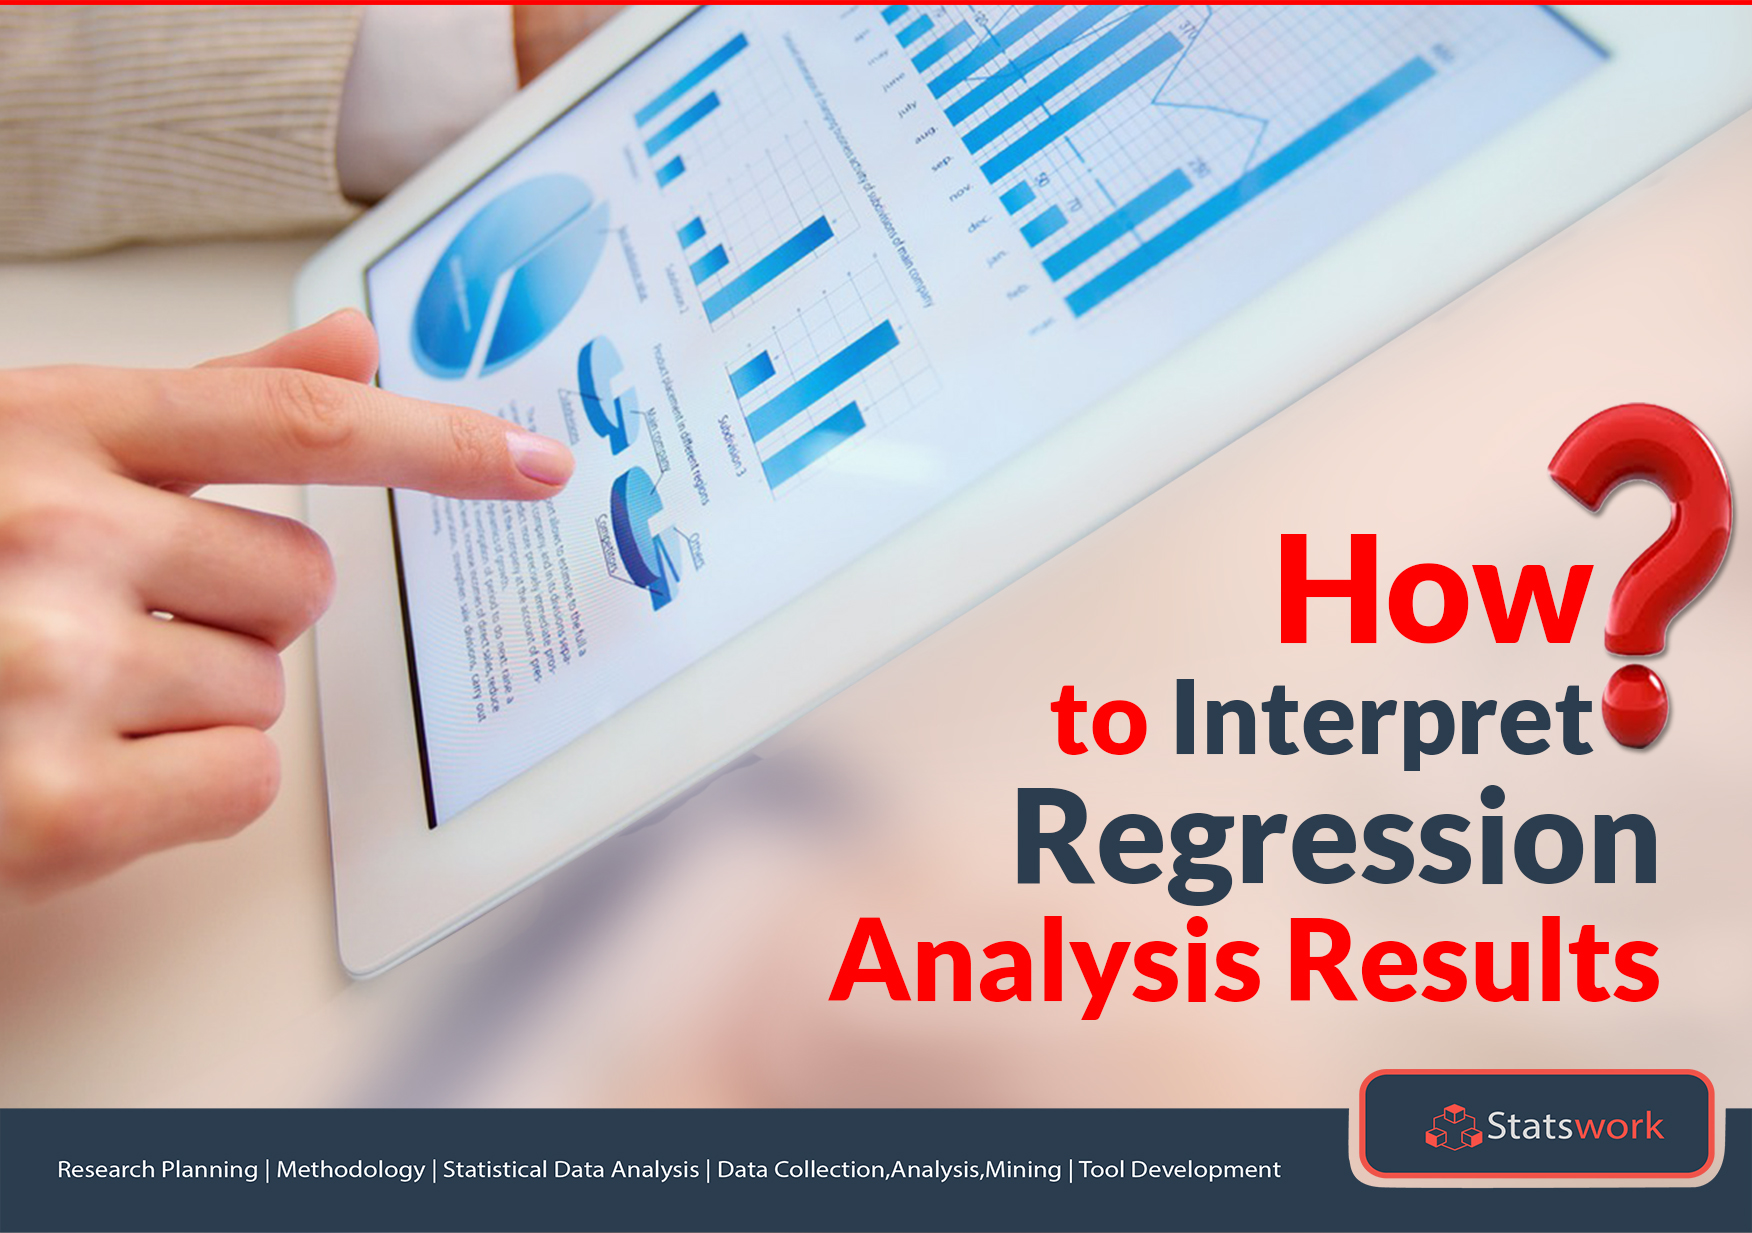 How to Interpret Regression Analysis Results: P-values & Coefficients?